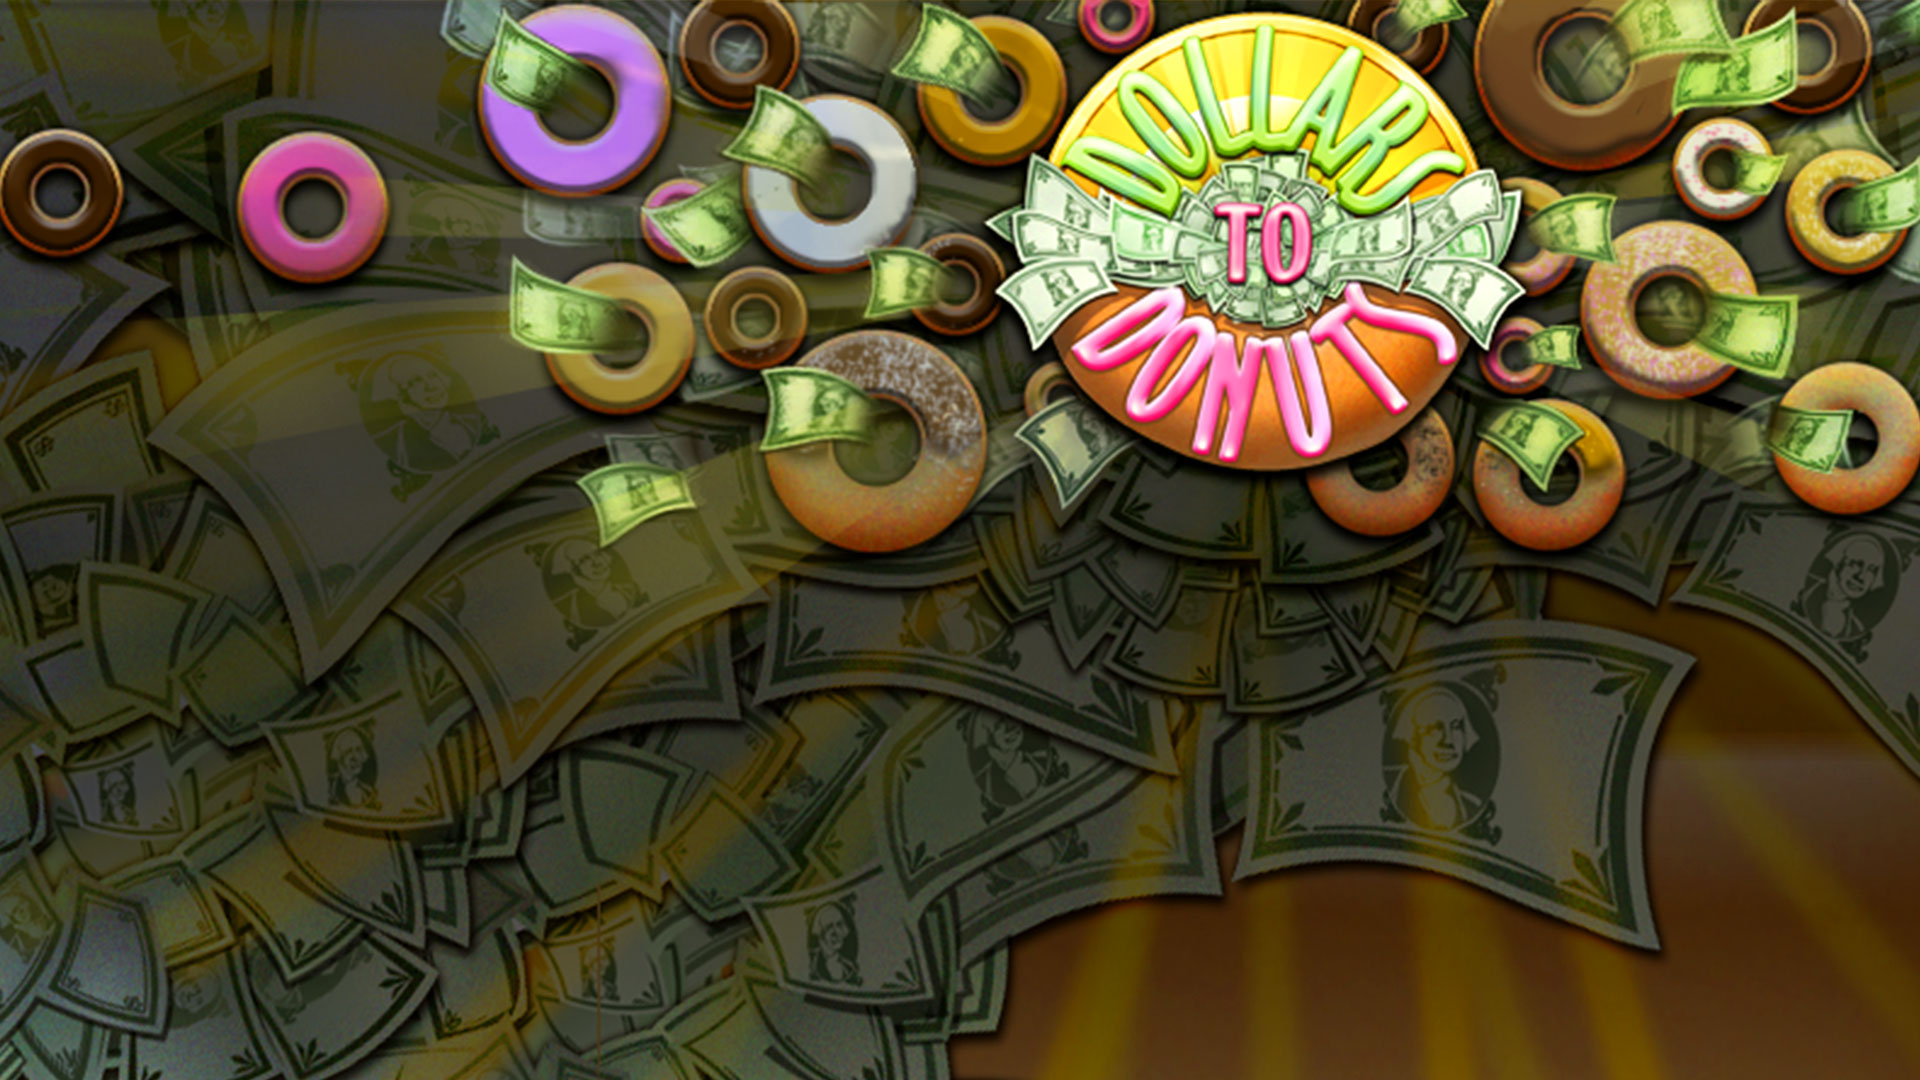 Game hight resolution background Dollars to Donuts